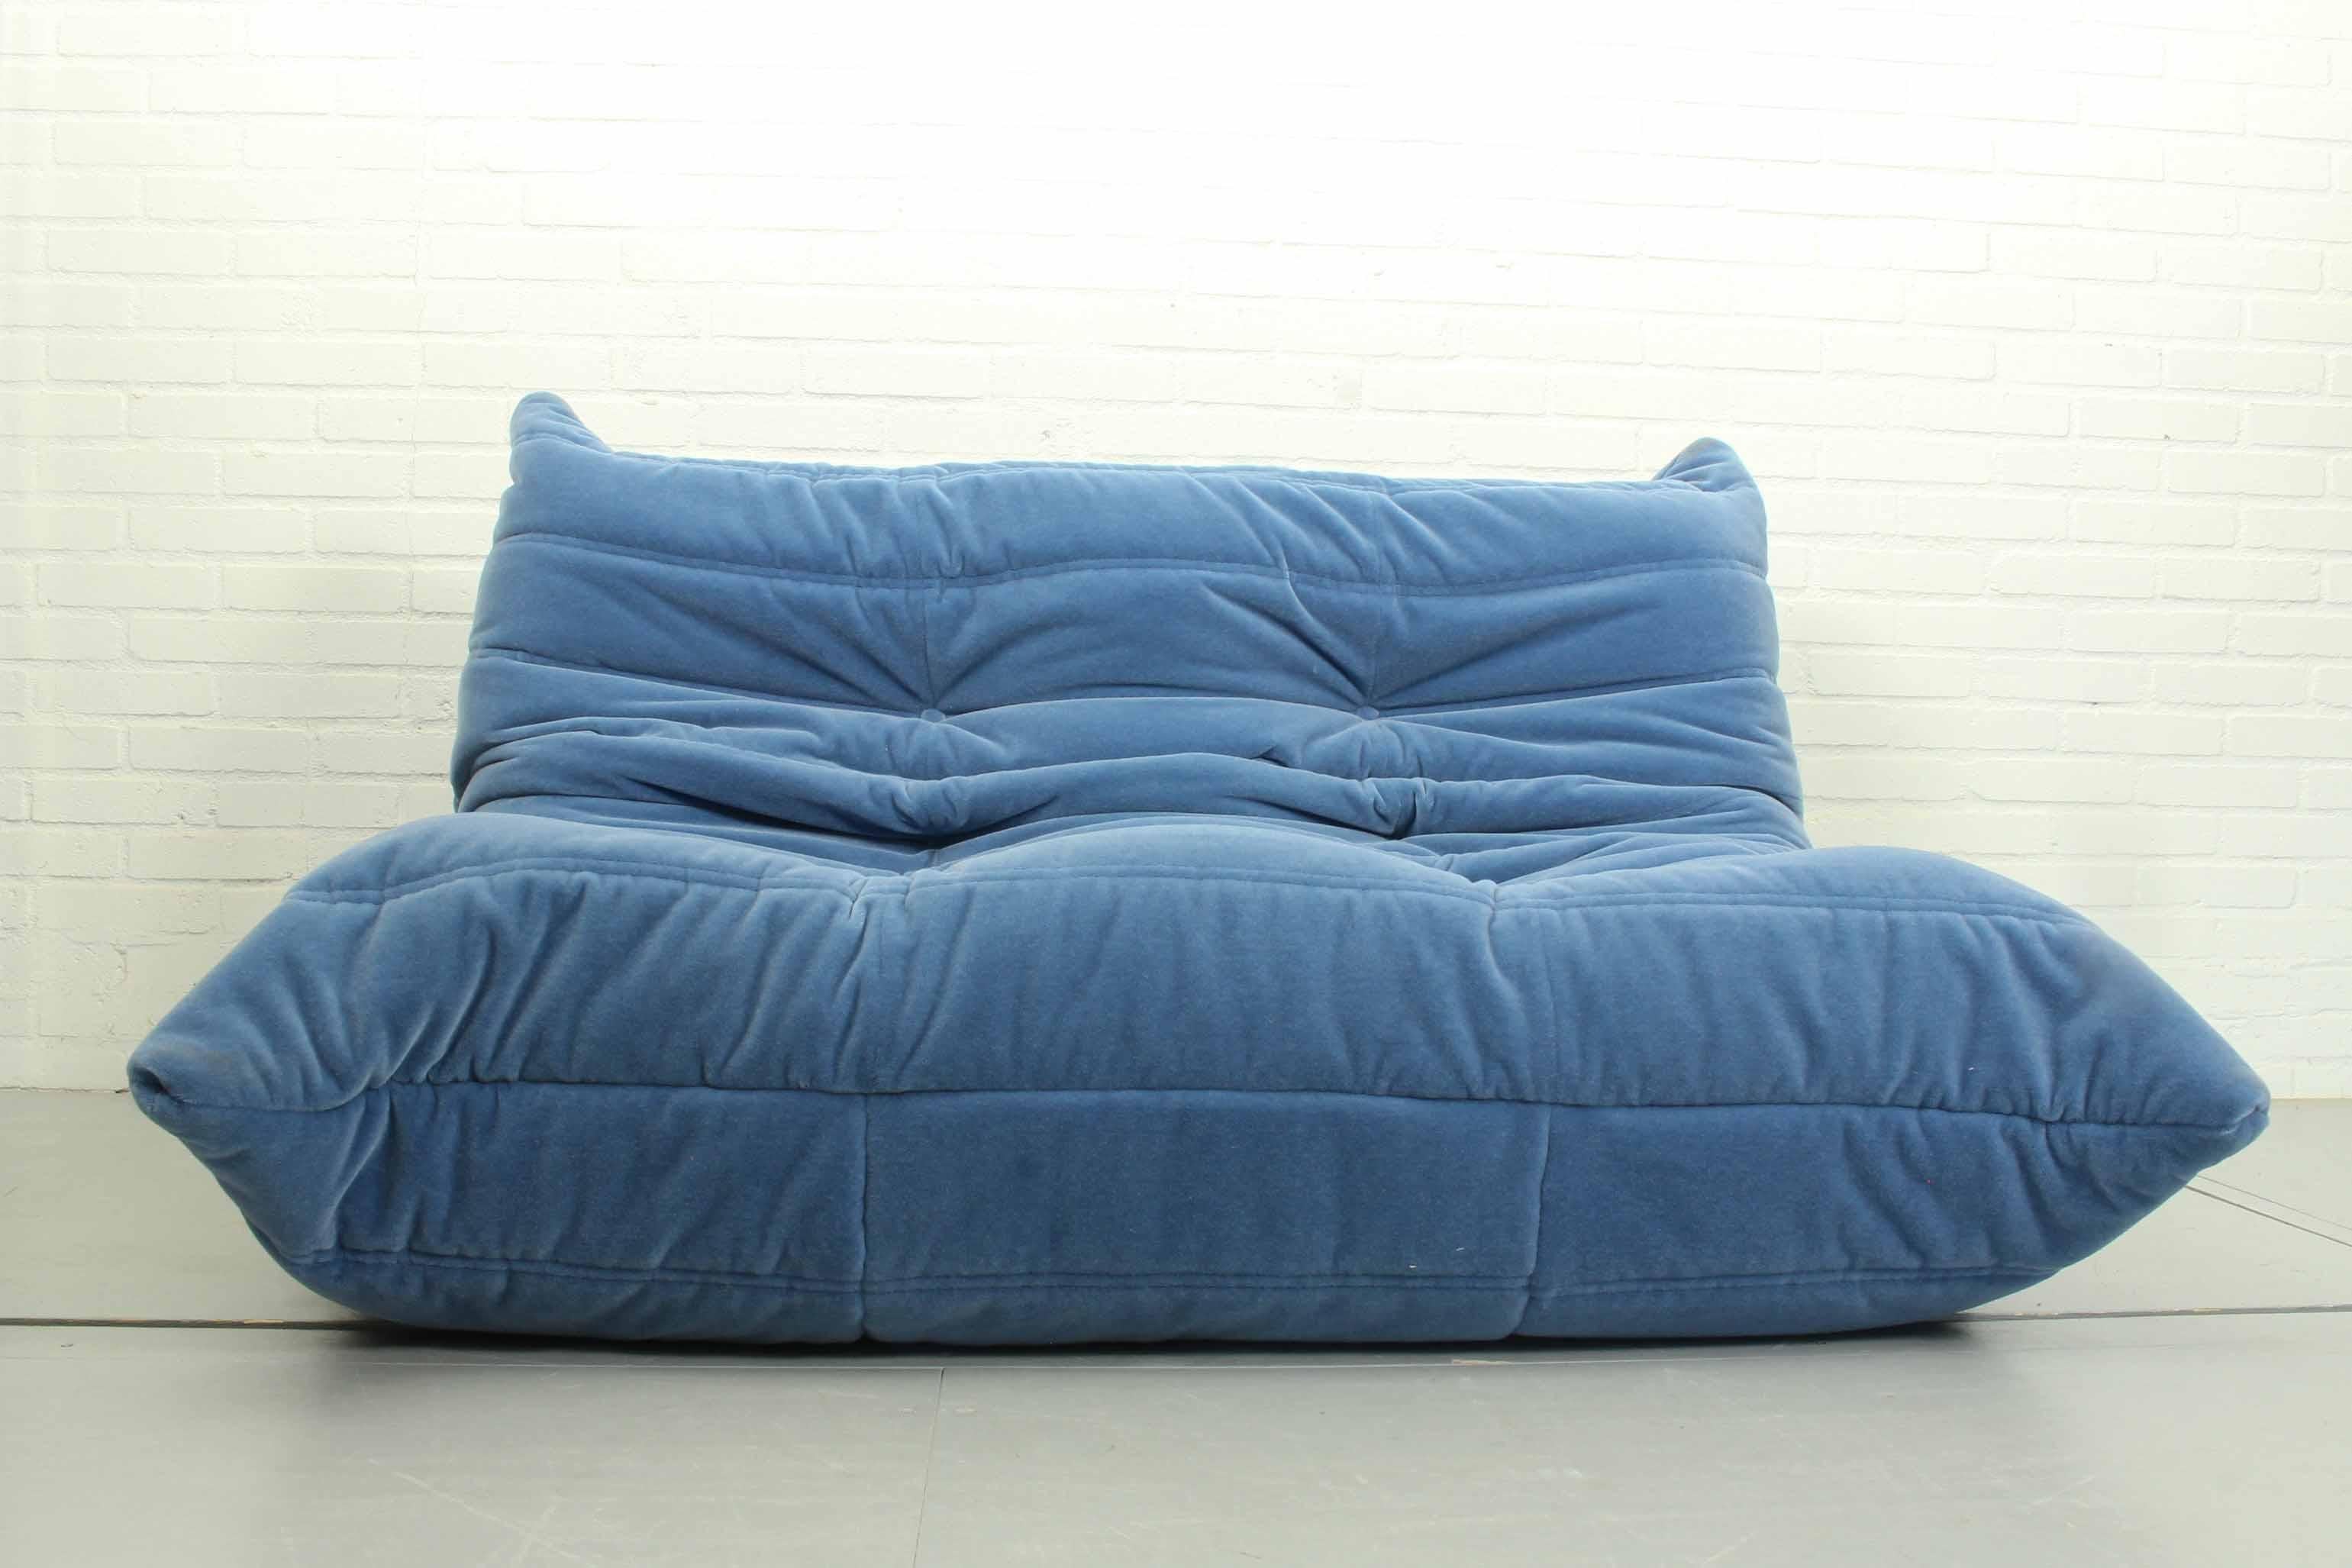 Togo sofa with 2 seats by Ligne Roset in excellent condition. Reupholstered in a high quality steel blue luxurious mohair which gives a beautiful and rich effect. The Togo is the lounge sofa. It has an ergonomic design, multiple density polyether